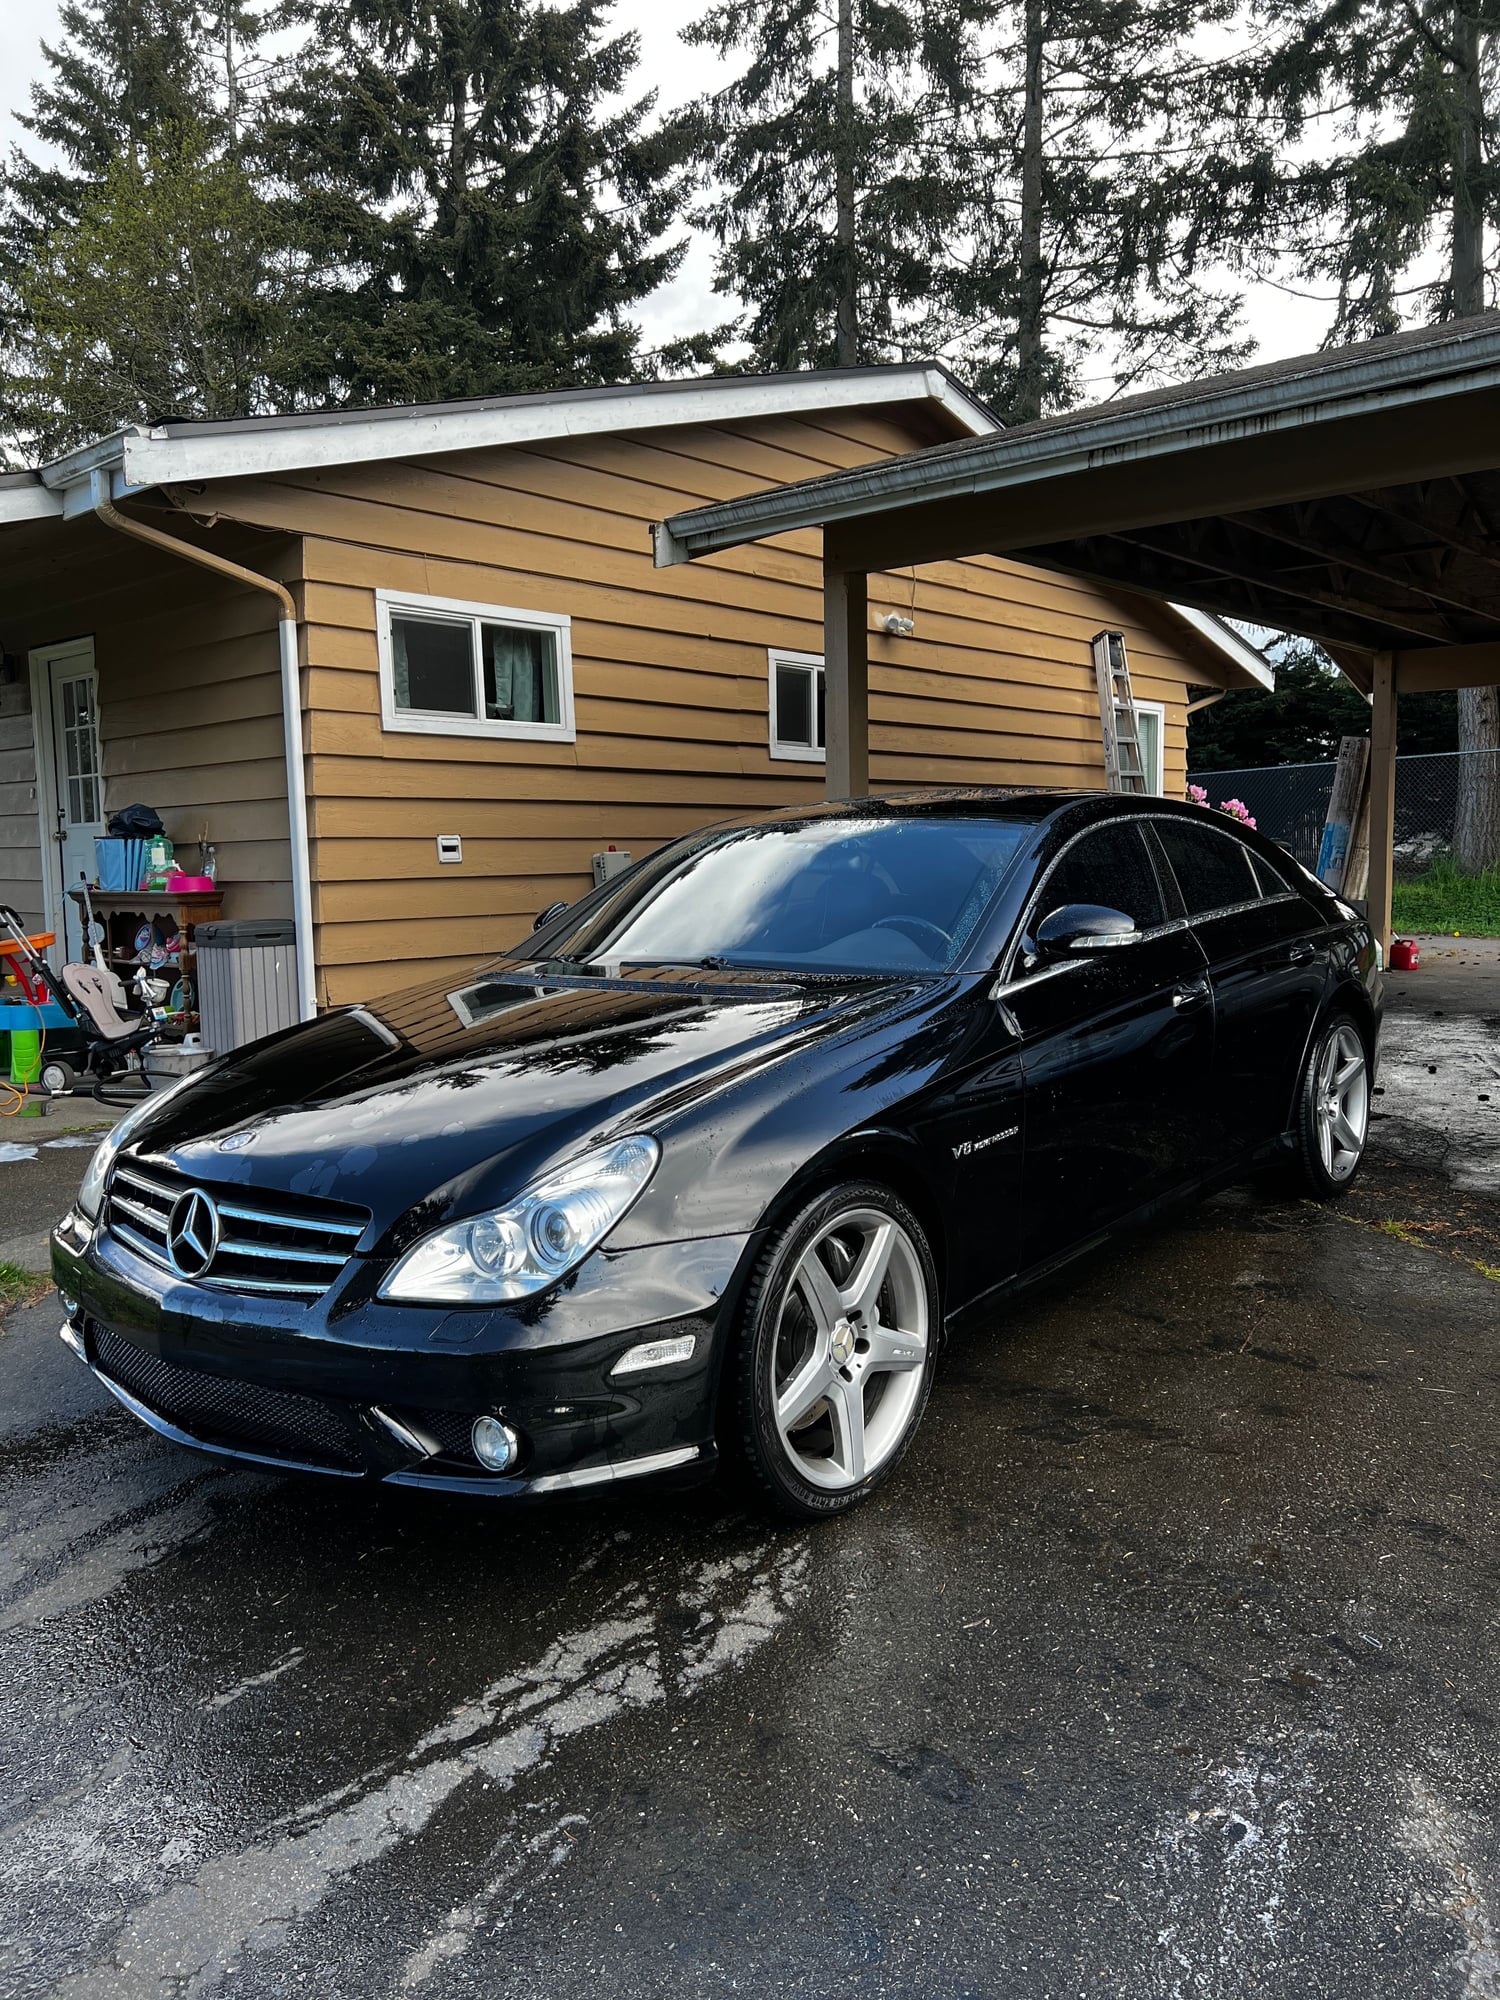 2006 Mercedes-Benz CLS55 AMG - CLS55 for sale (Stock) - Used - VIN WDDDJ76X66A040118 - 121,800 Miles - 8 cyl - 2WD - Automatic - Coupe - Black - Puyallup, WA 98373, United States